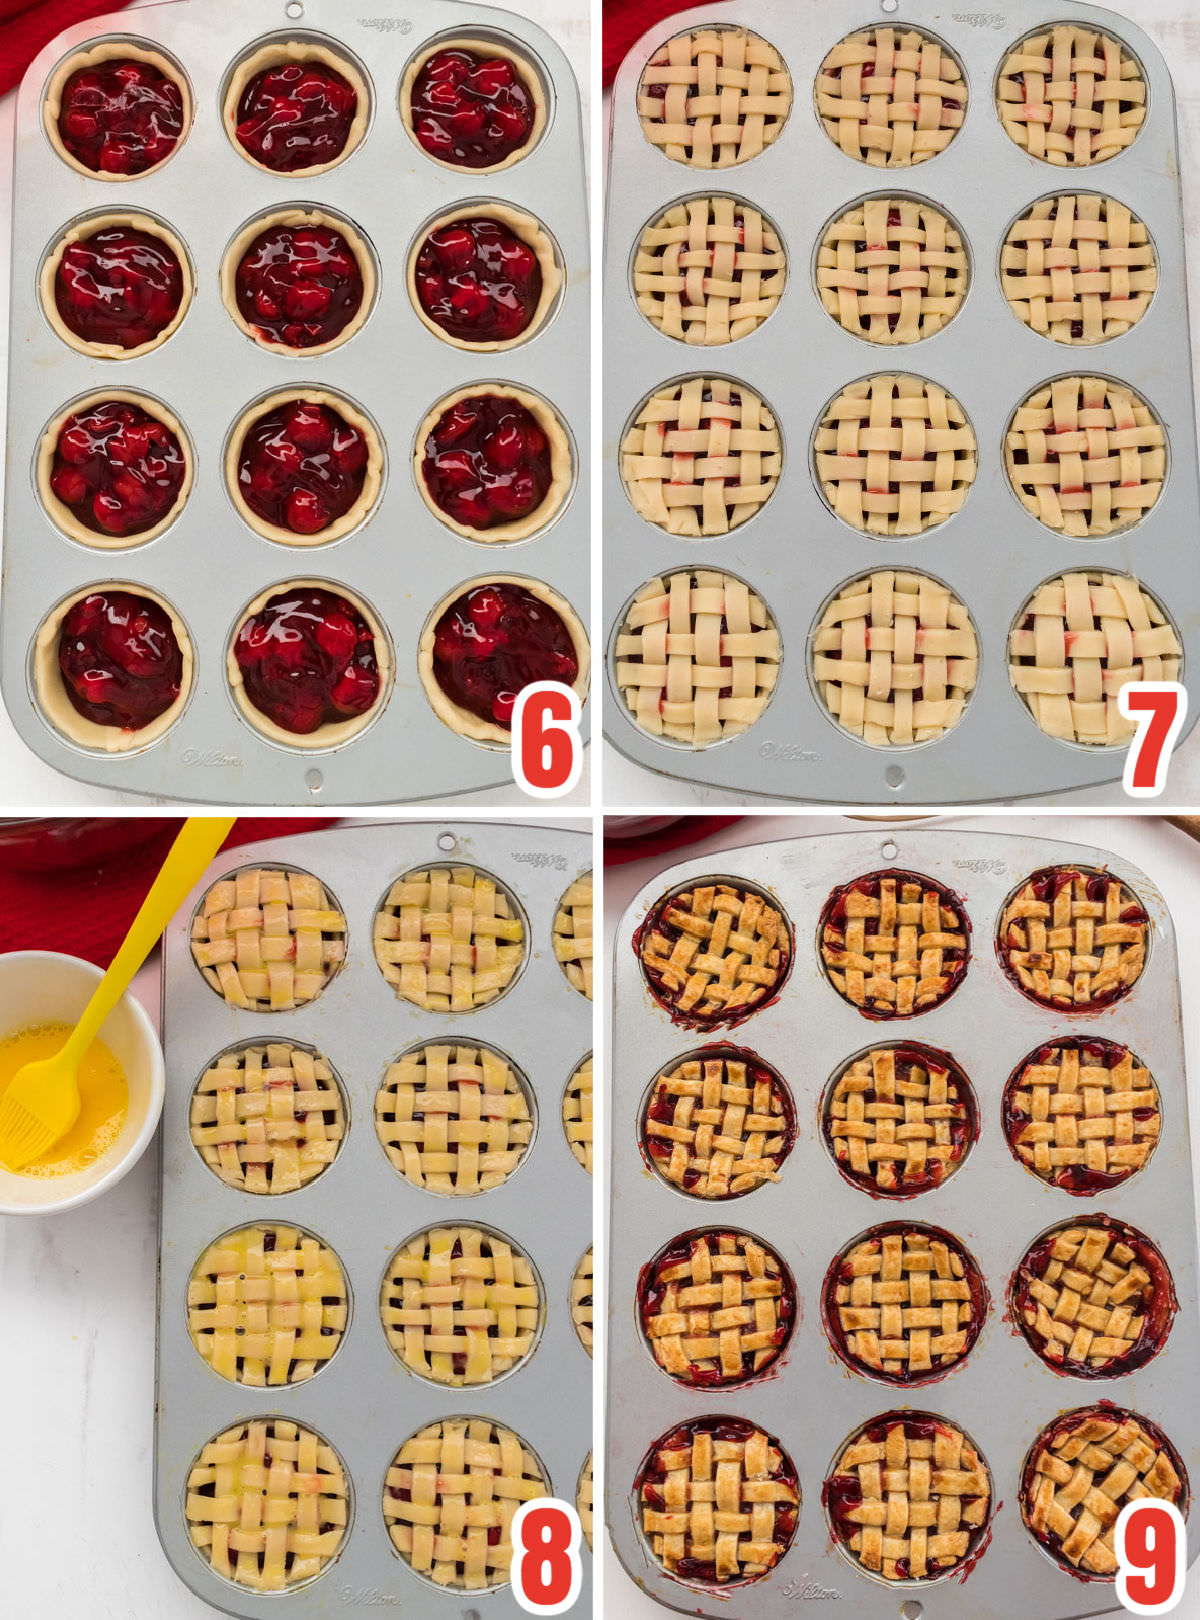 Collage image showing how to fill the pie crusts with cherry filling and lattice top to the pies.